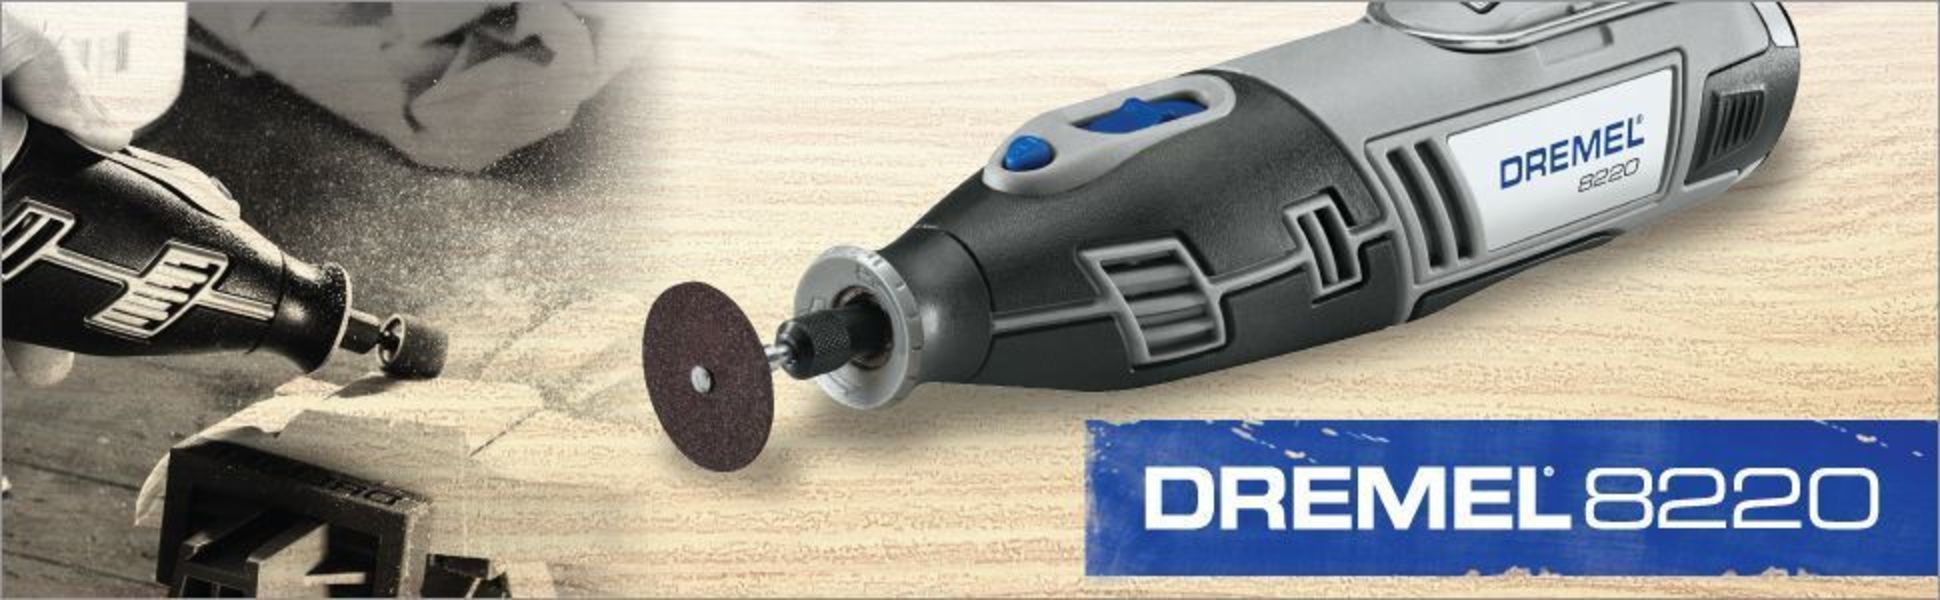 Dremel 8220 1 28 12V Max Lithium Ion Rotary Tool Kit With 1 5 Ah Battery  Pack From Hmkjhome, $237.04